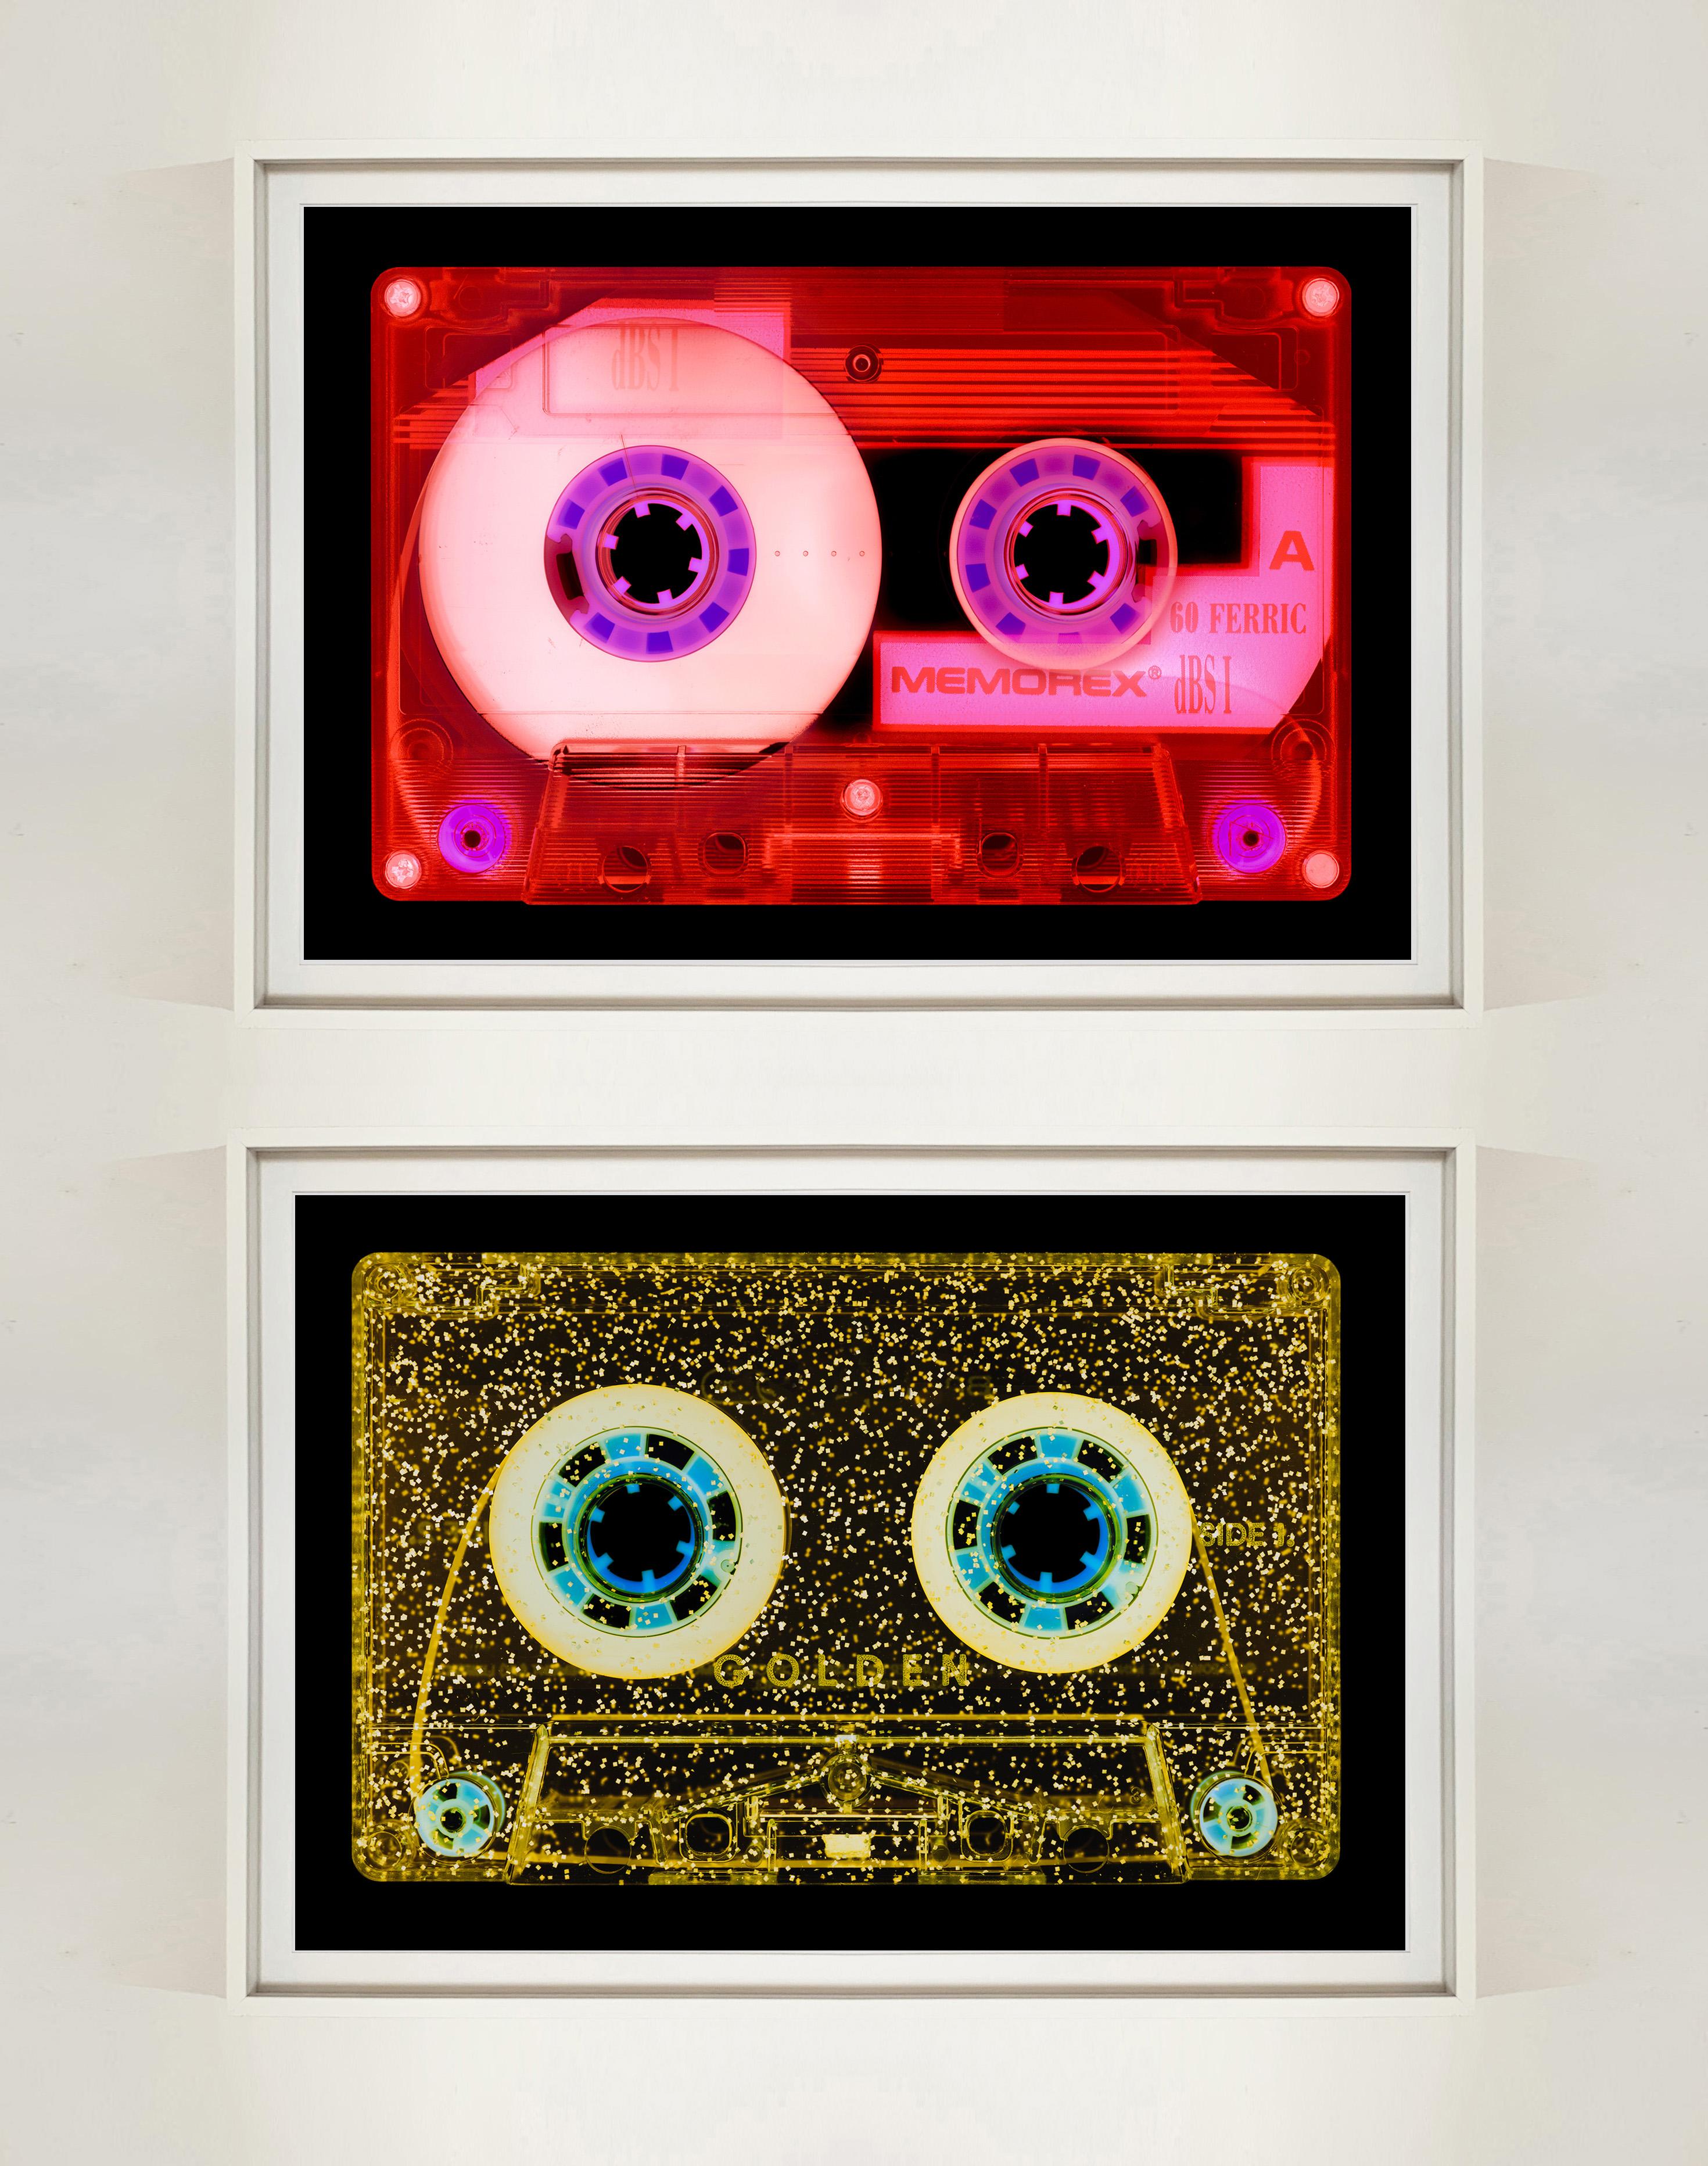 Tape Collection, All That Glitters is Golden - Pop Art Photography - Black Print by Heidler & Heeps